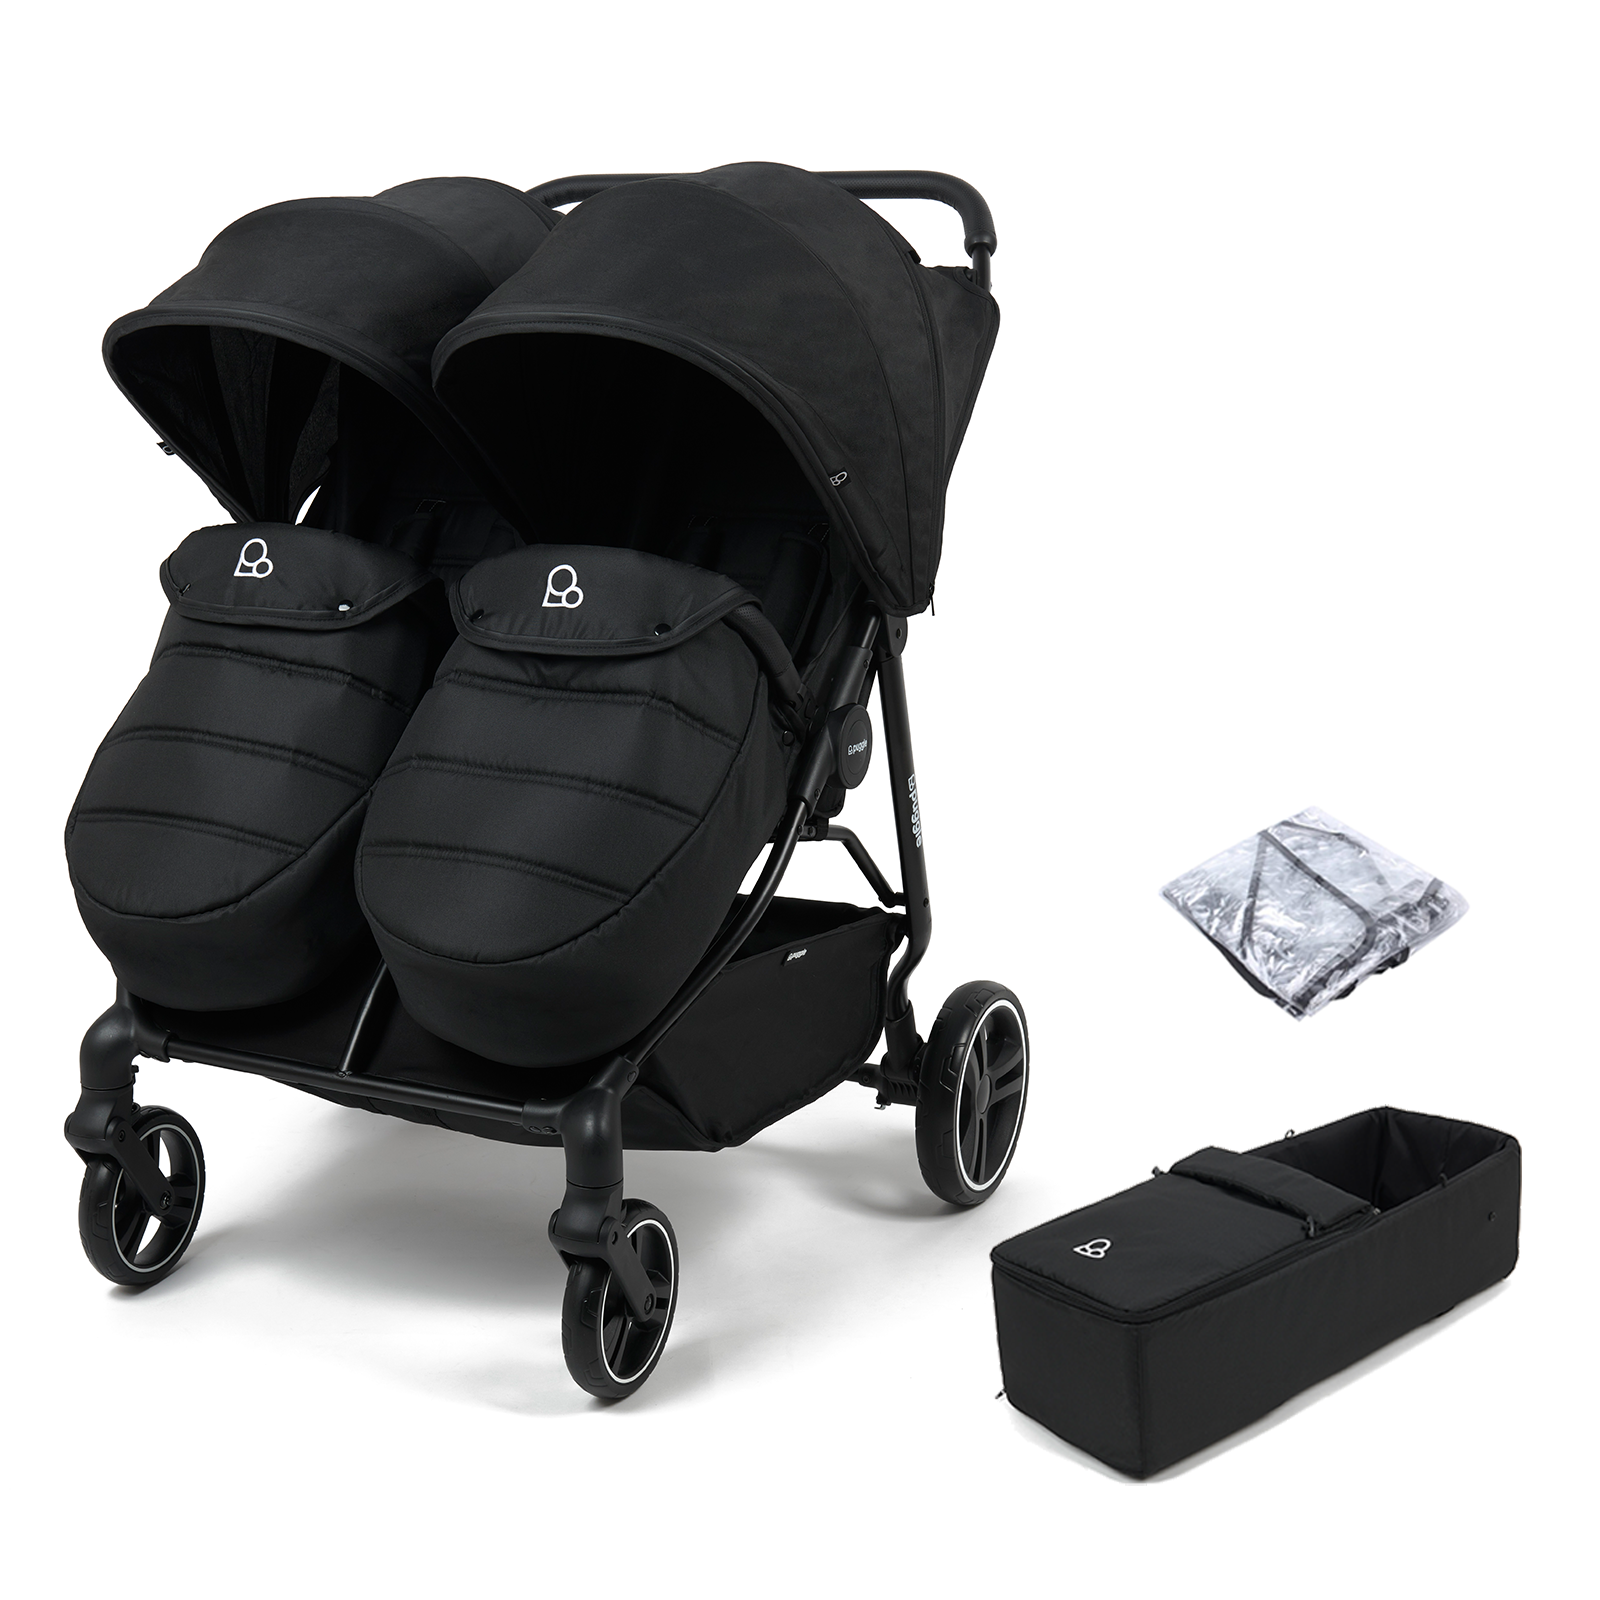 Puggle Urban City Easyfold Twin Double Pushchair + 1 Soft Carrycot - Storm Black